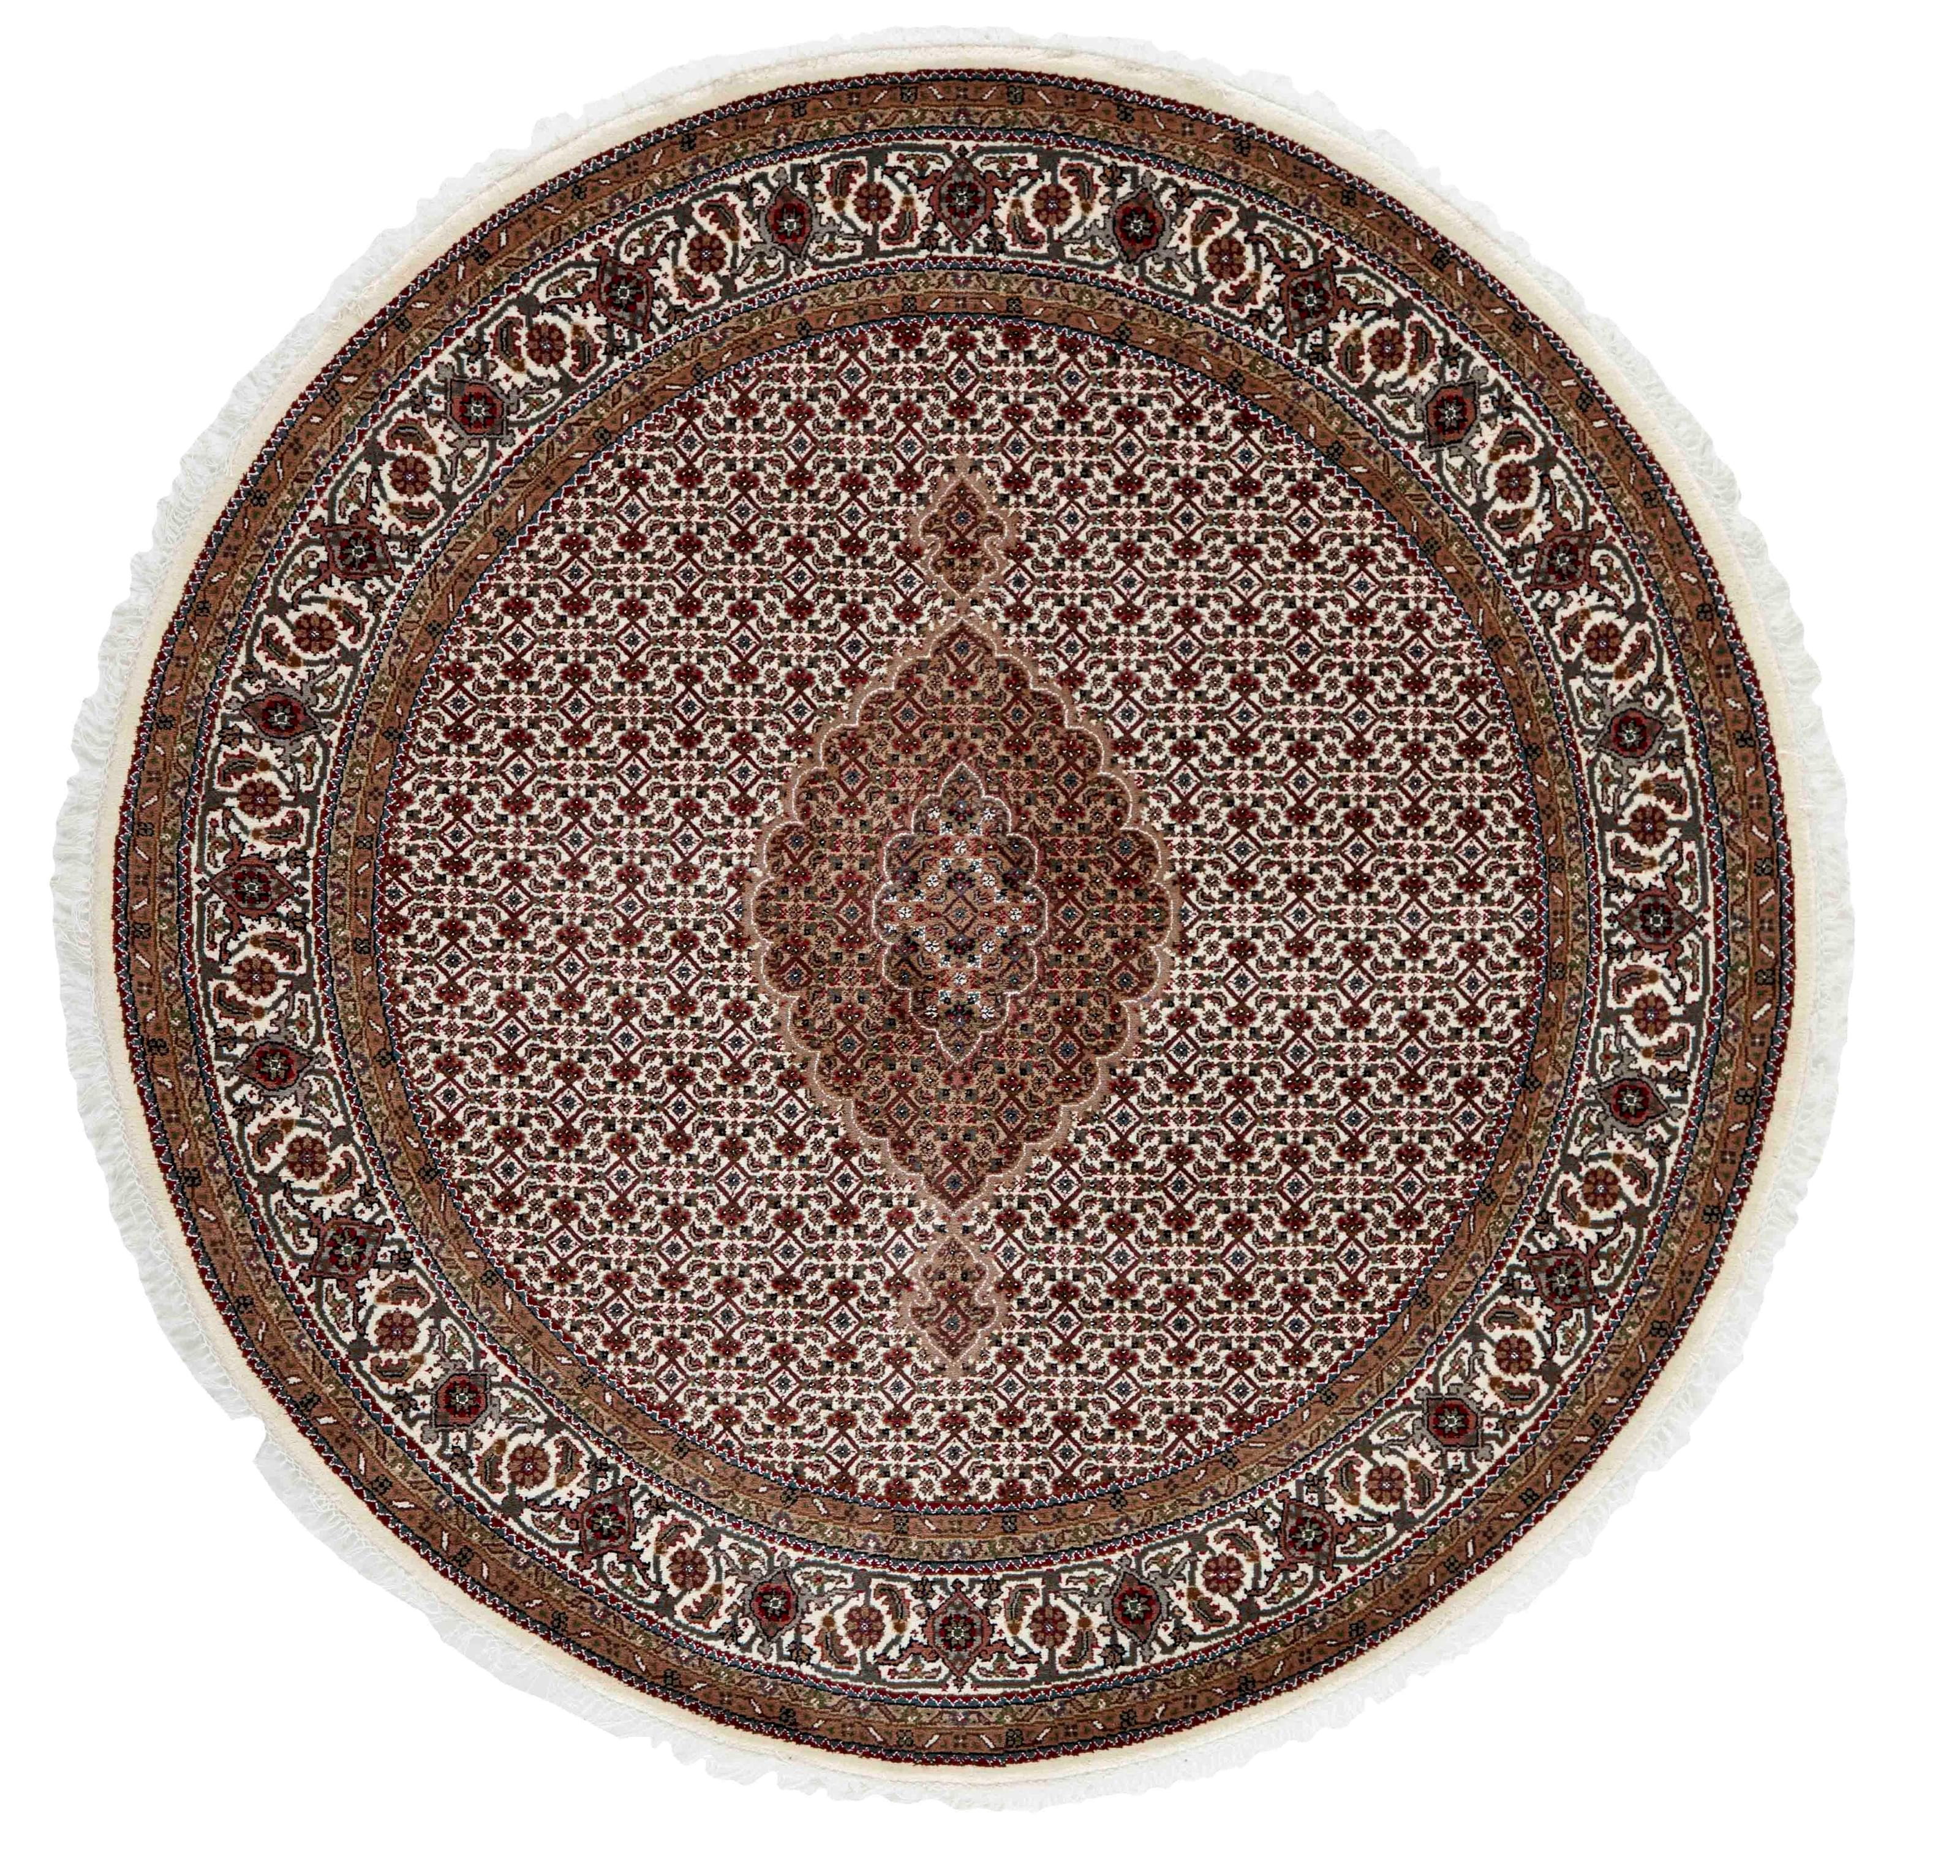 round Oriental rug with traditional geometric and floral design in red, beige and black